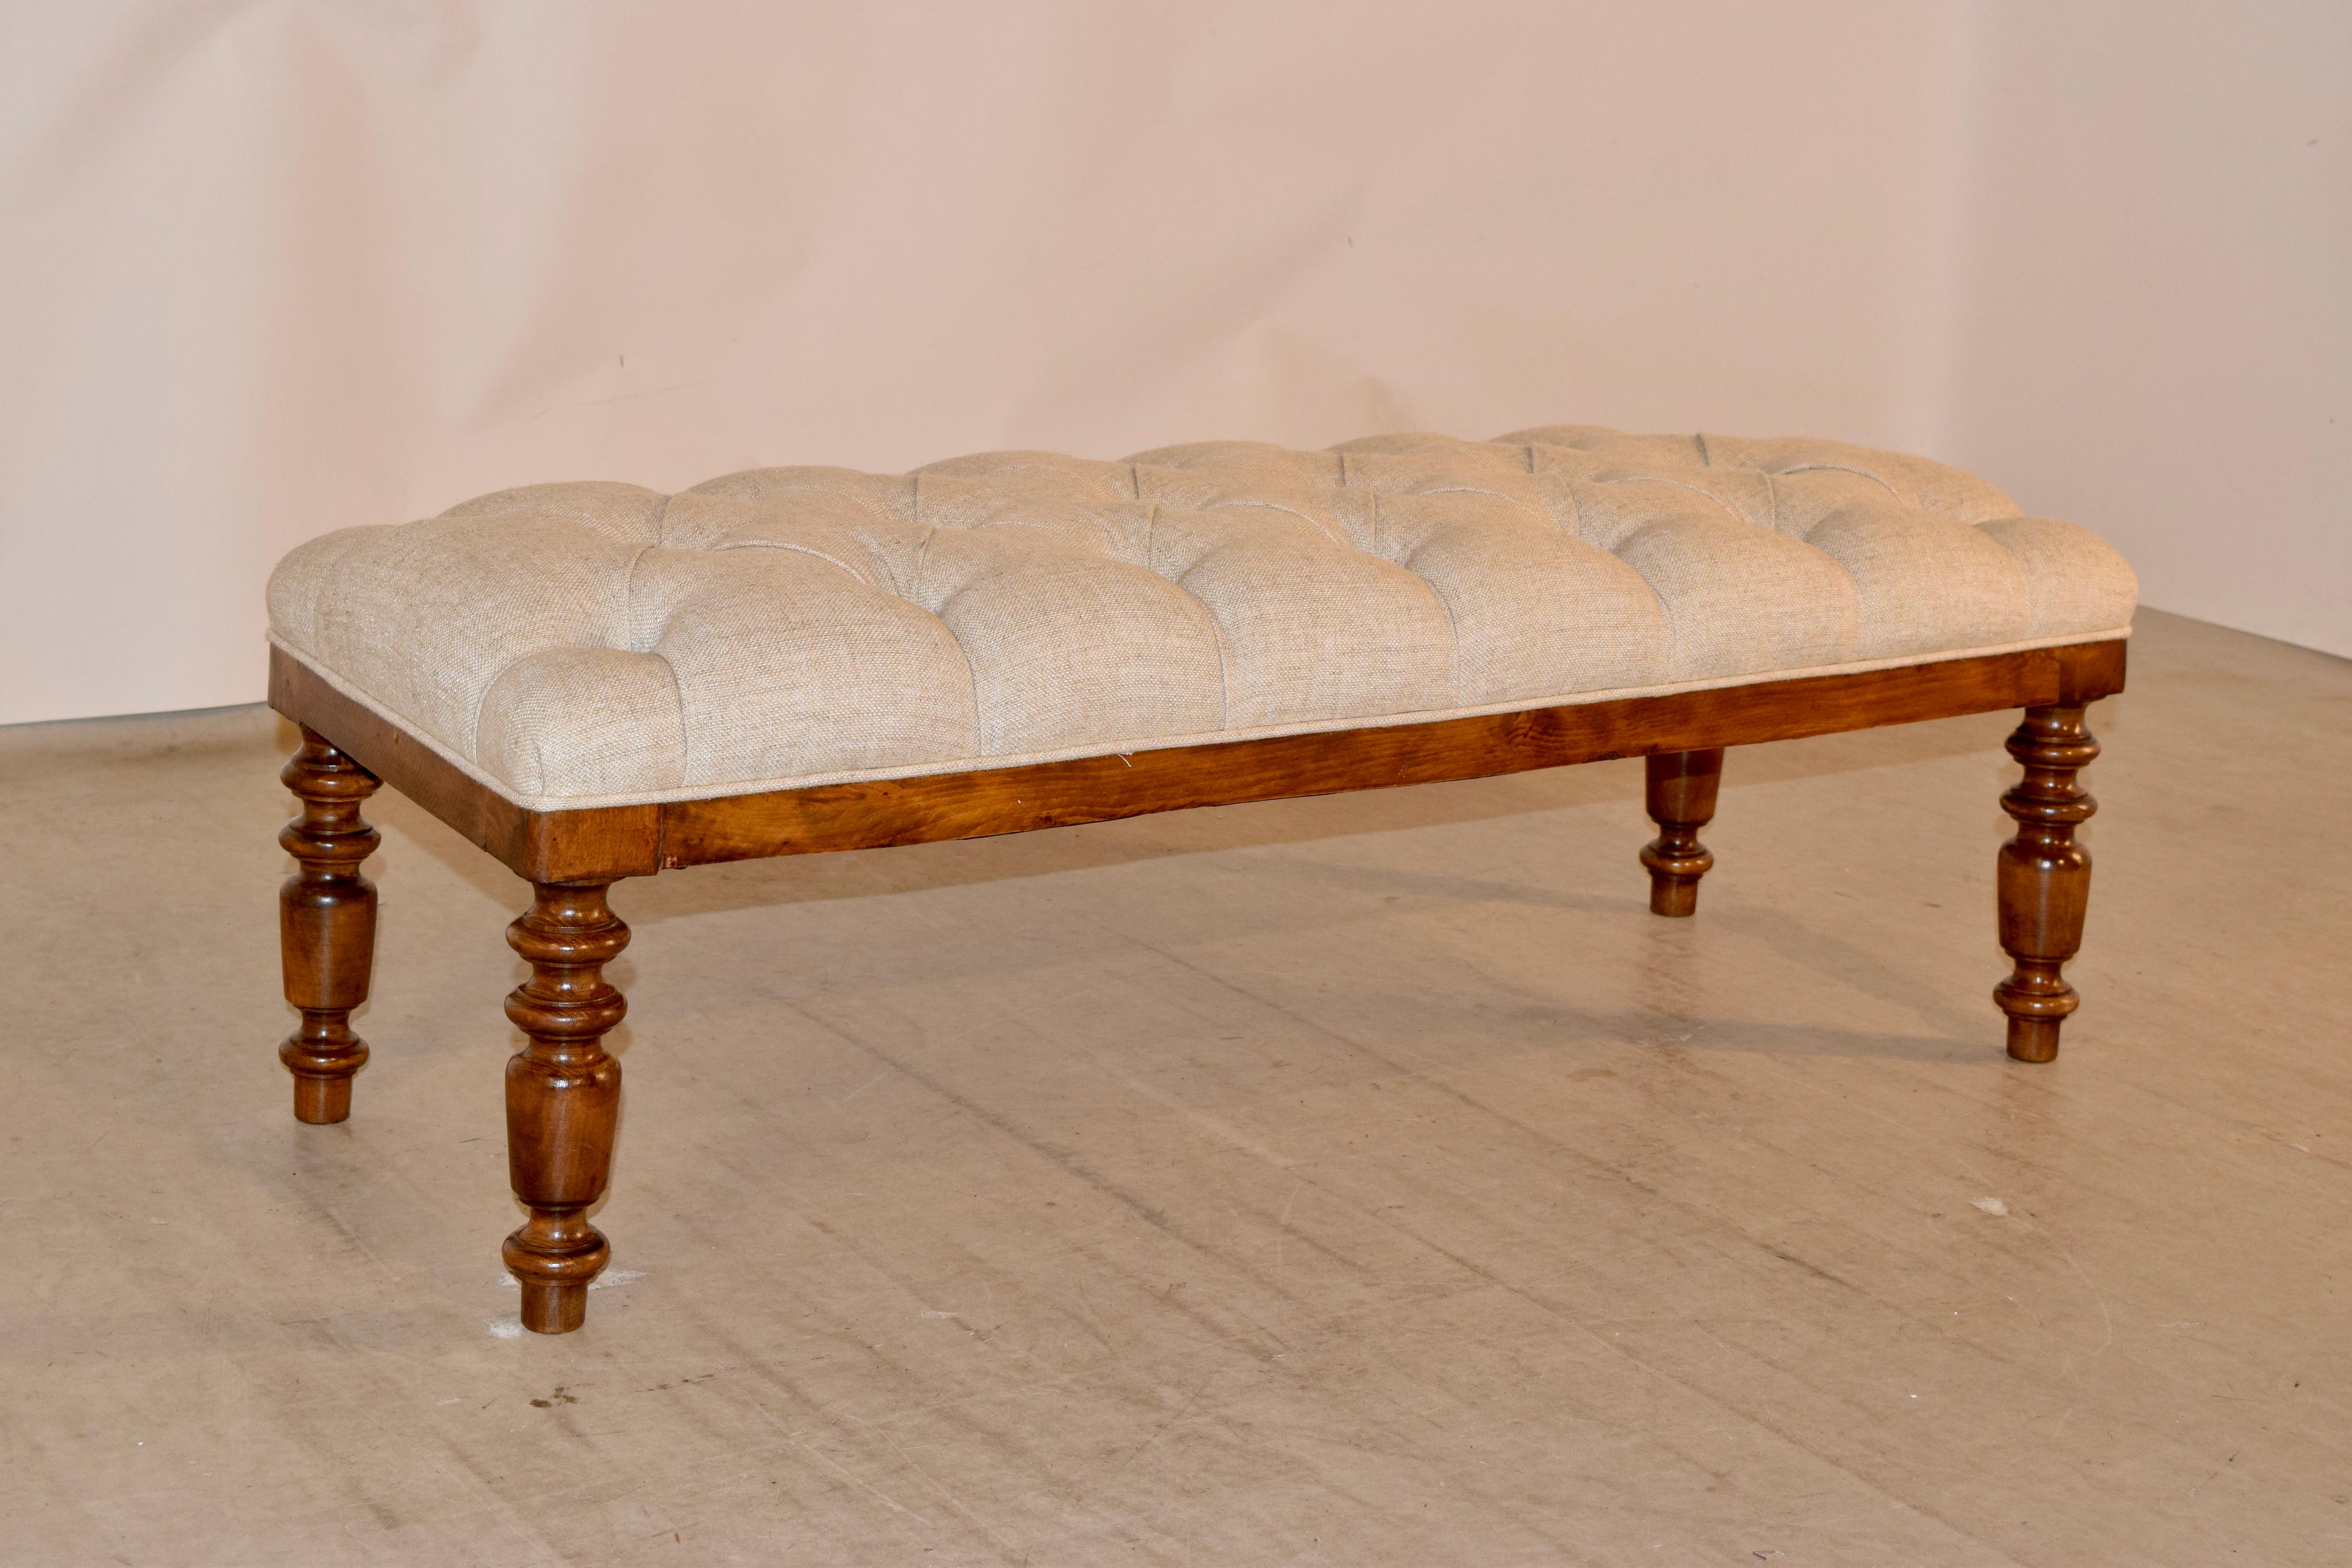 19th century oak bench from England with a Chesterfield style upholstered top in linen. The top has been newly upholstered and tufted in linen and is supported on a lovely oak frame with hand turned legs.